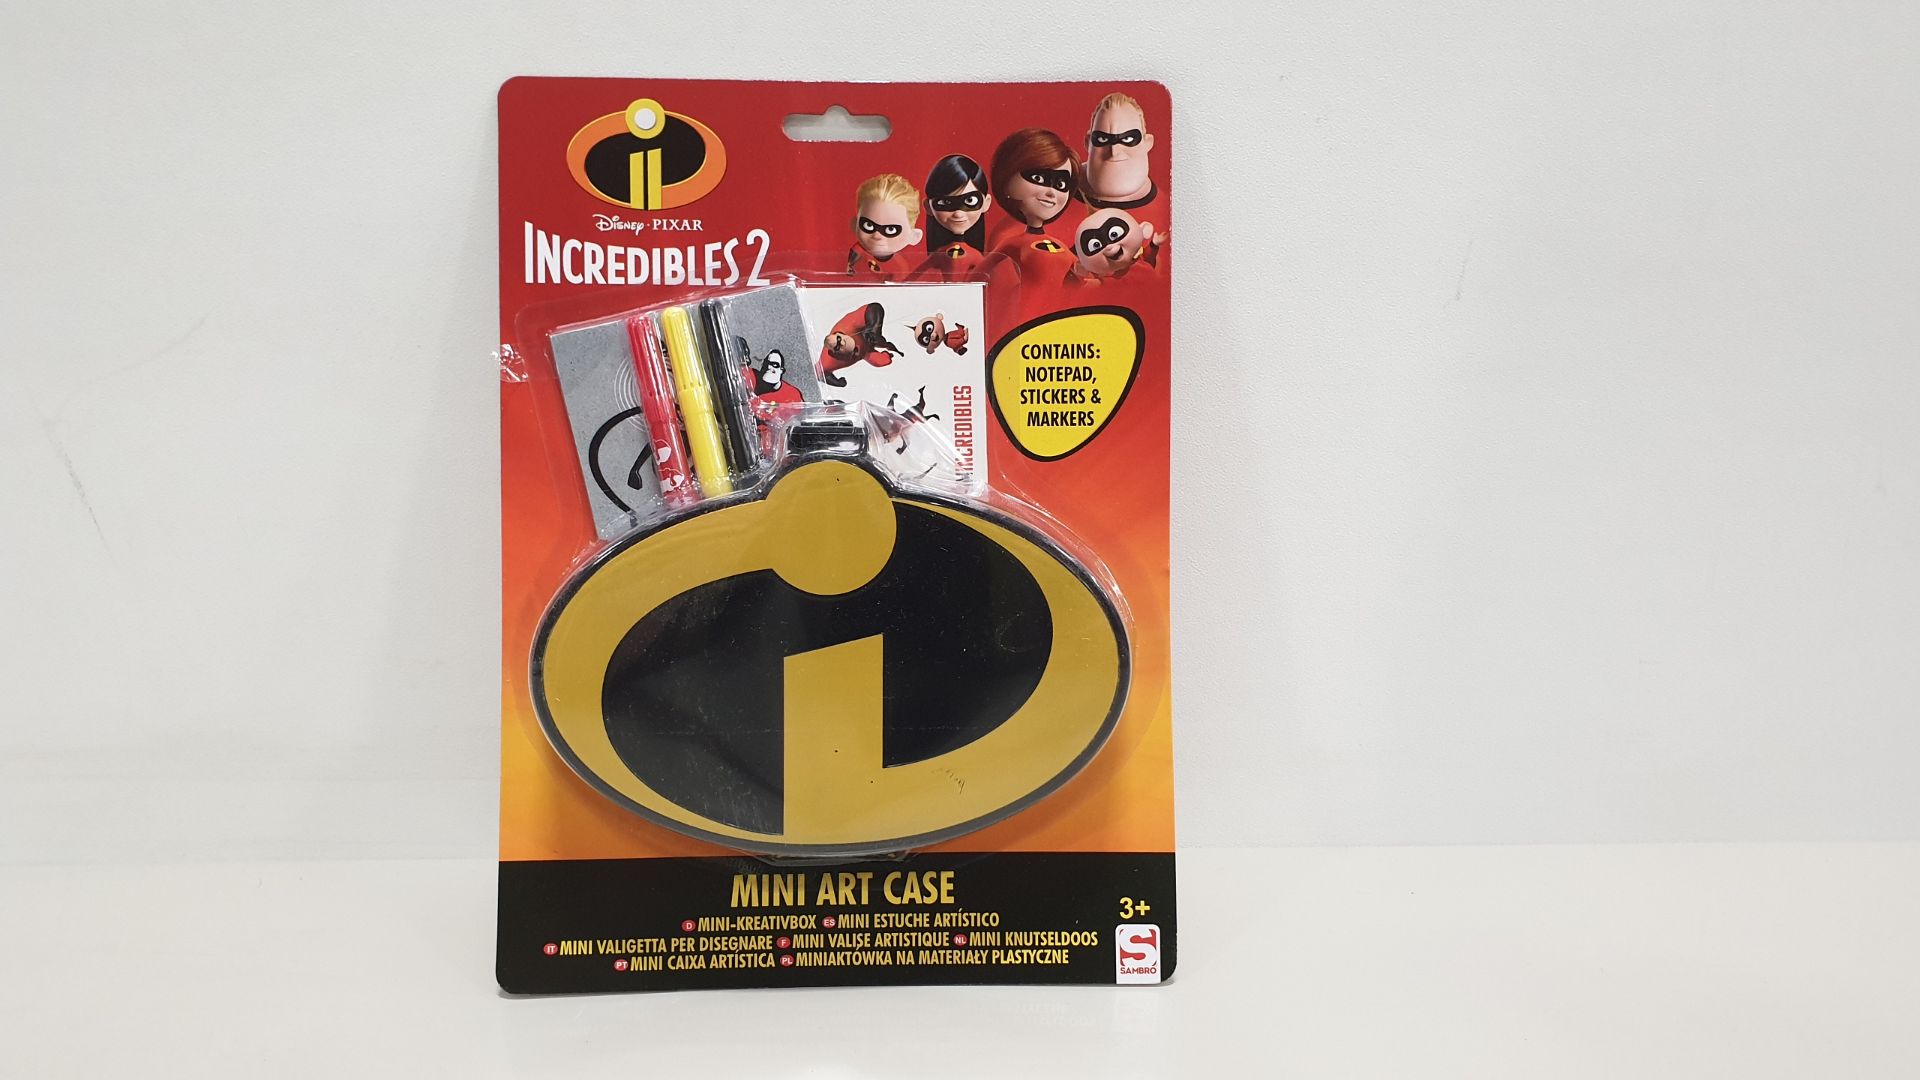 72 X BRAND NEW DISNEY PIXAR INCREDIBLES 2 MINI ART CASE THAT INCLUDES NOTEPAD, STICKERS AND